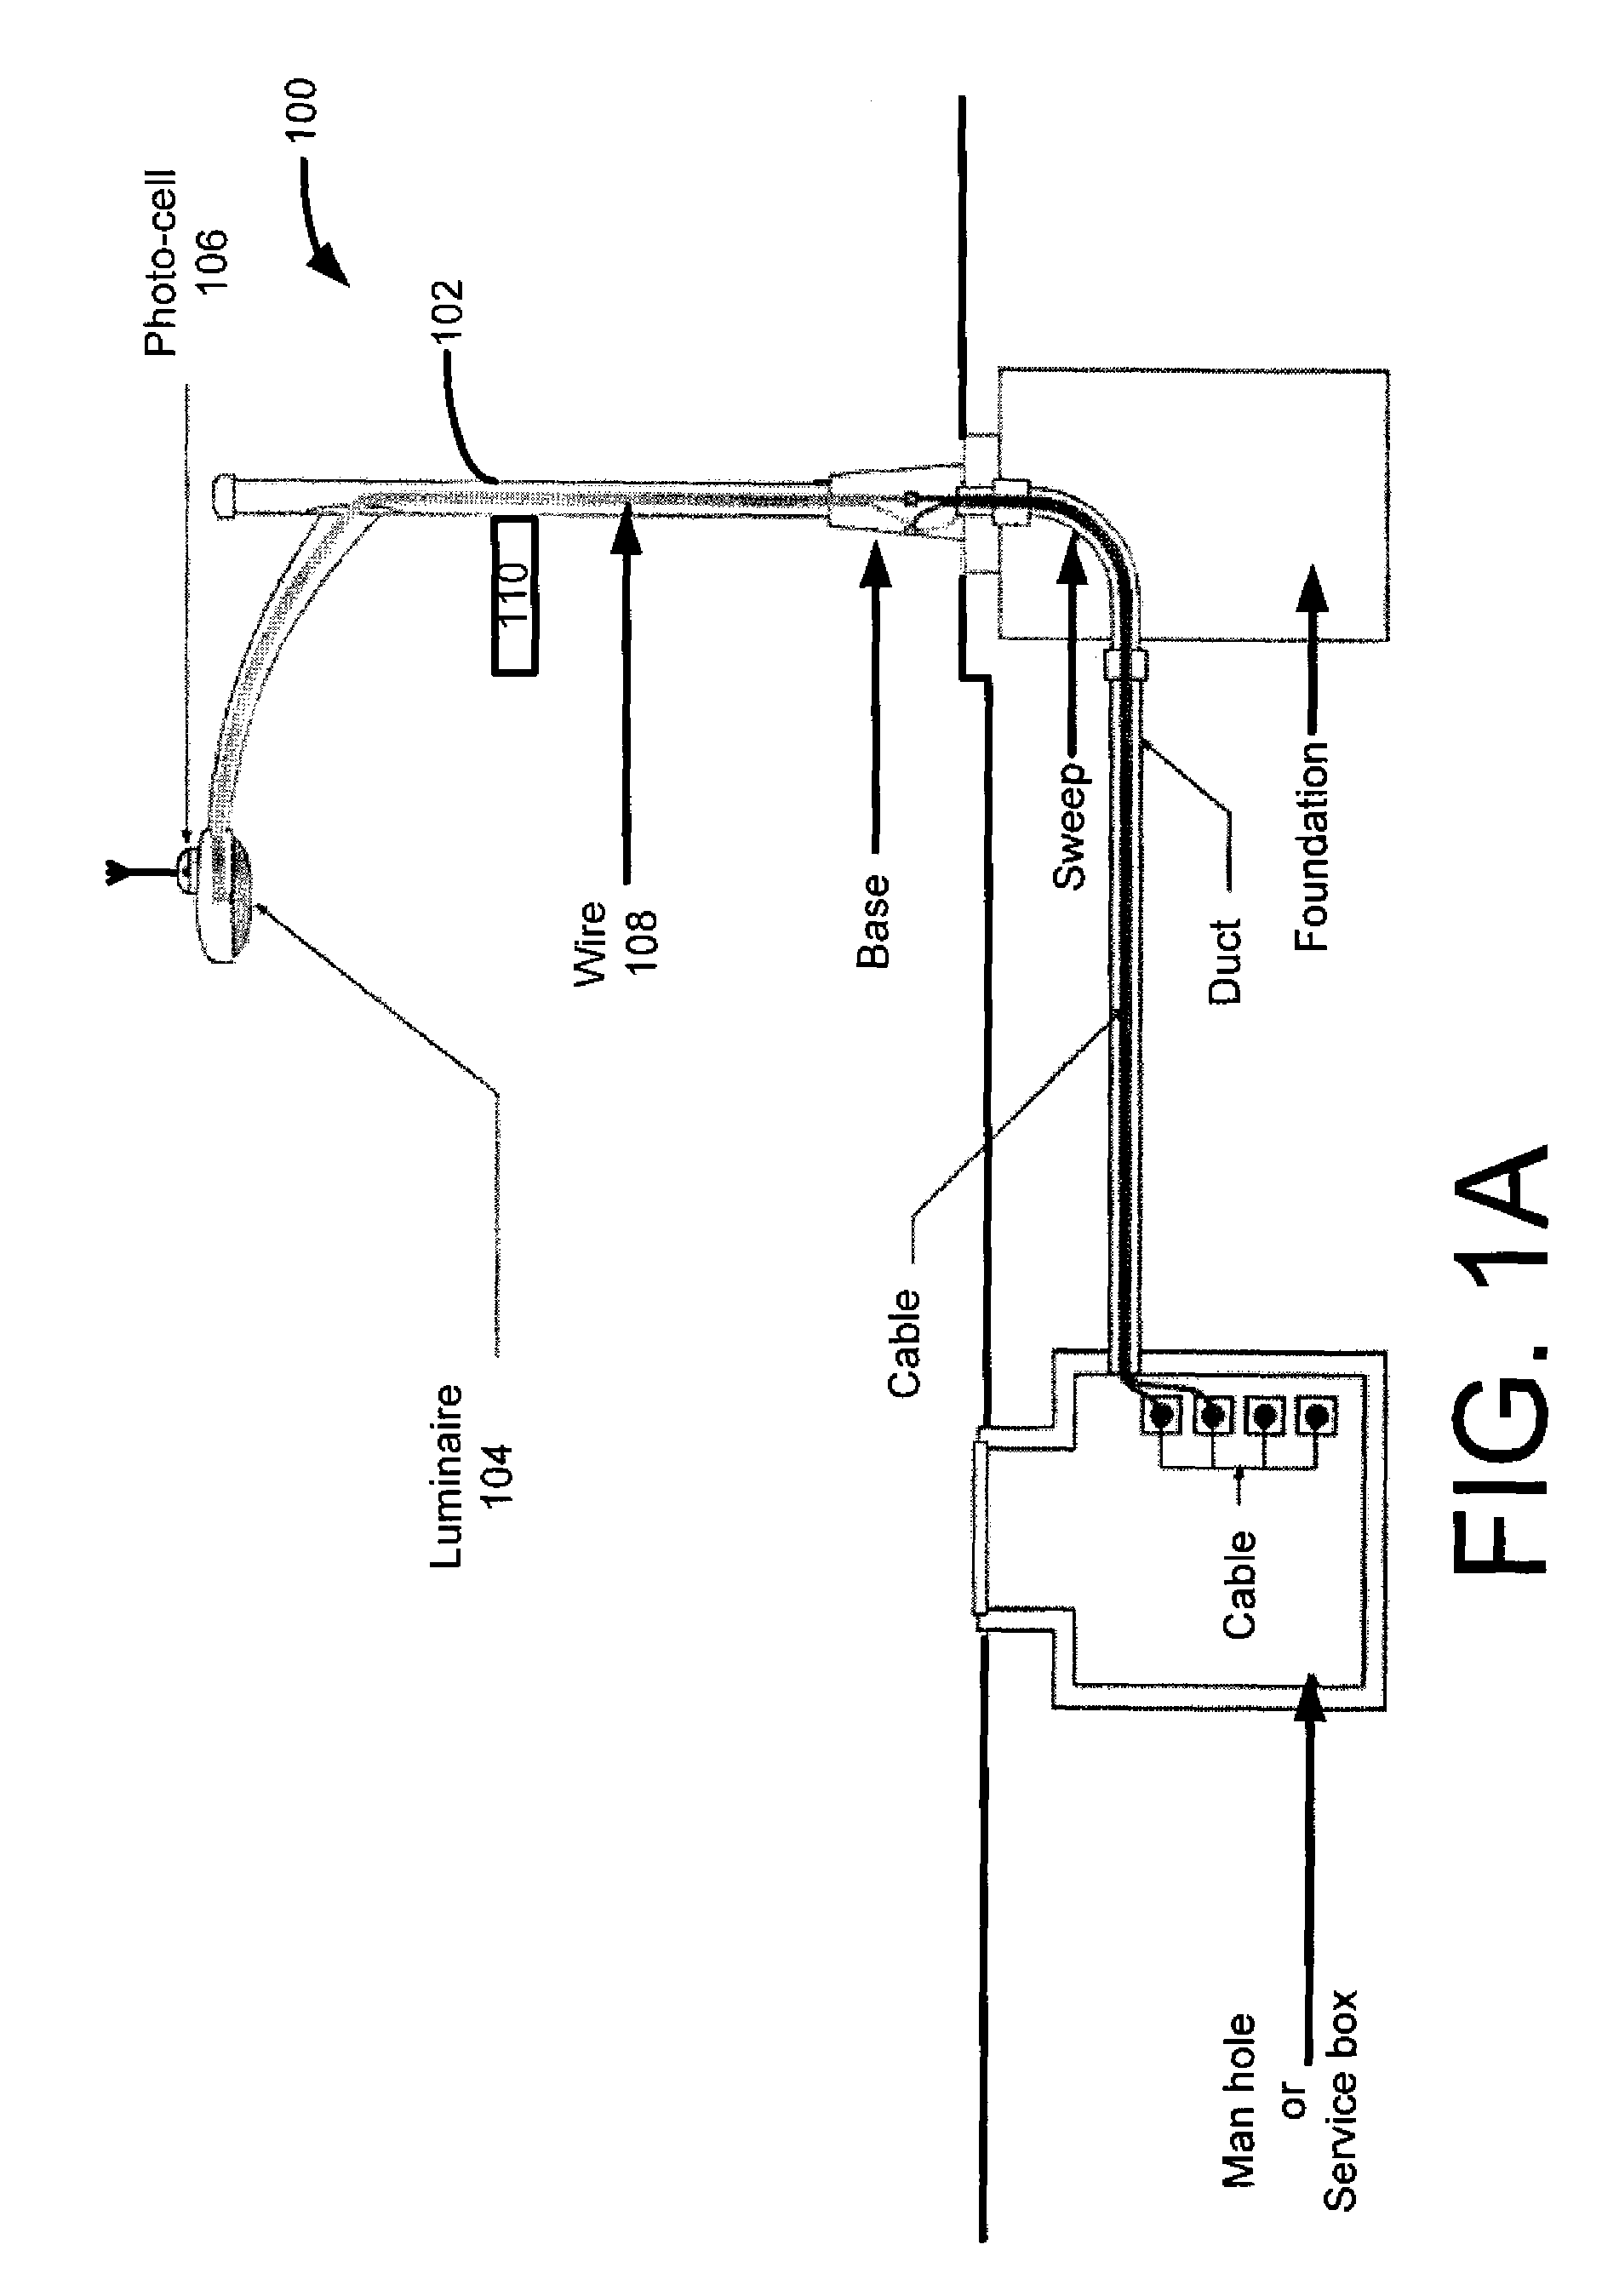 Systems, methods, and apparatuses for stray voltage detection